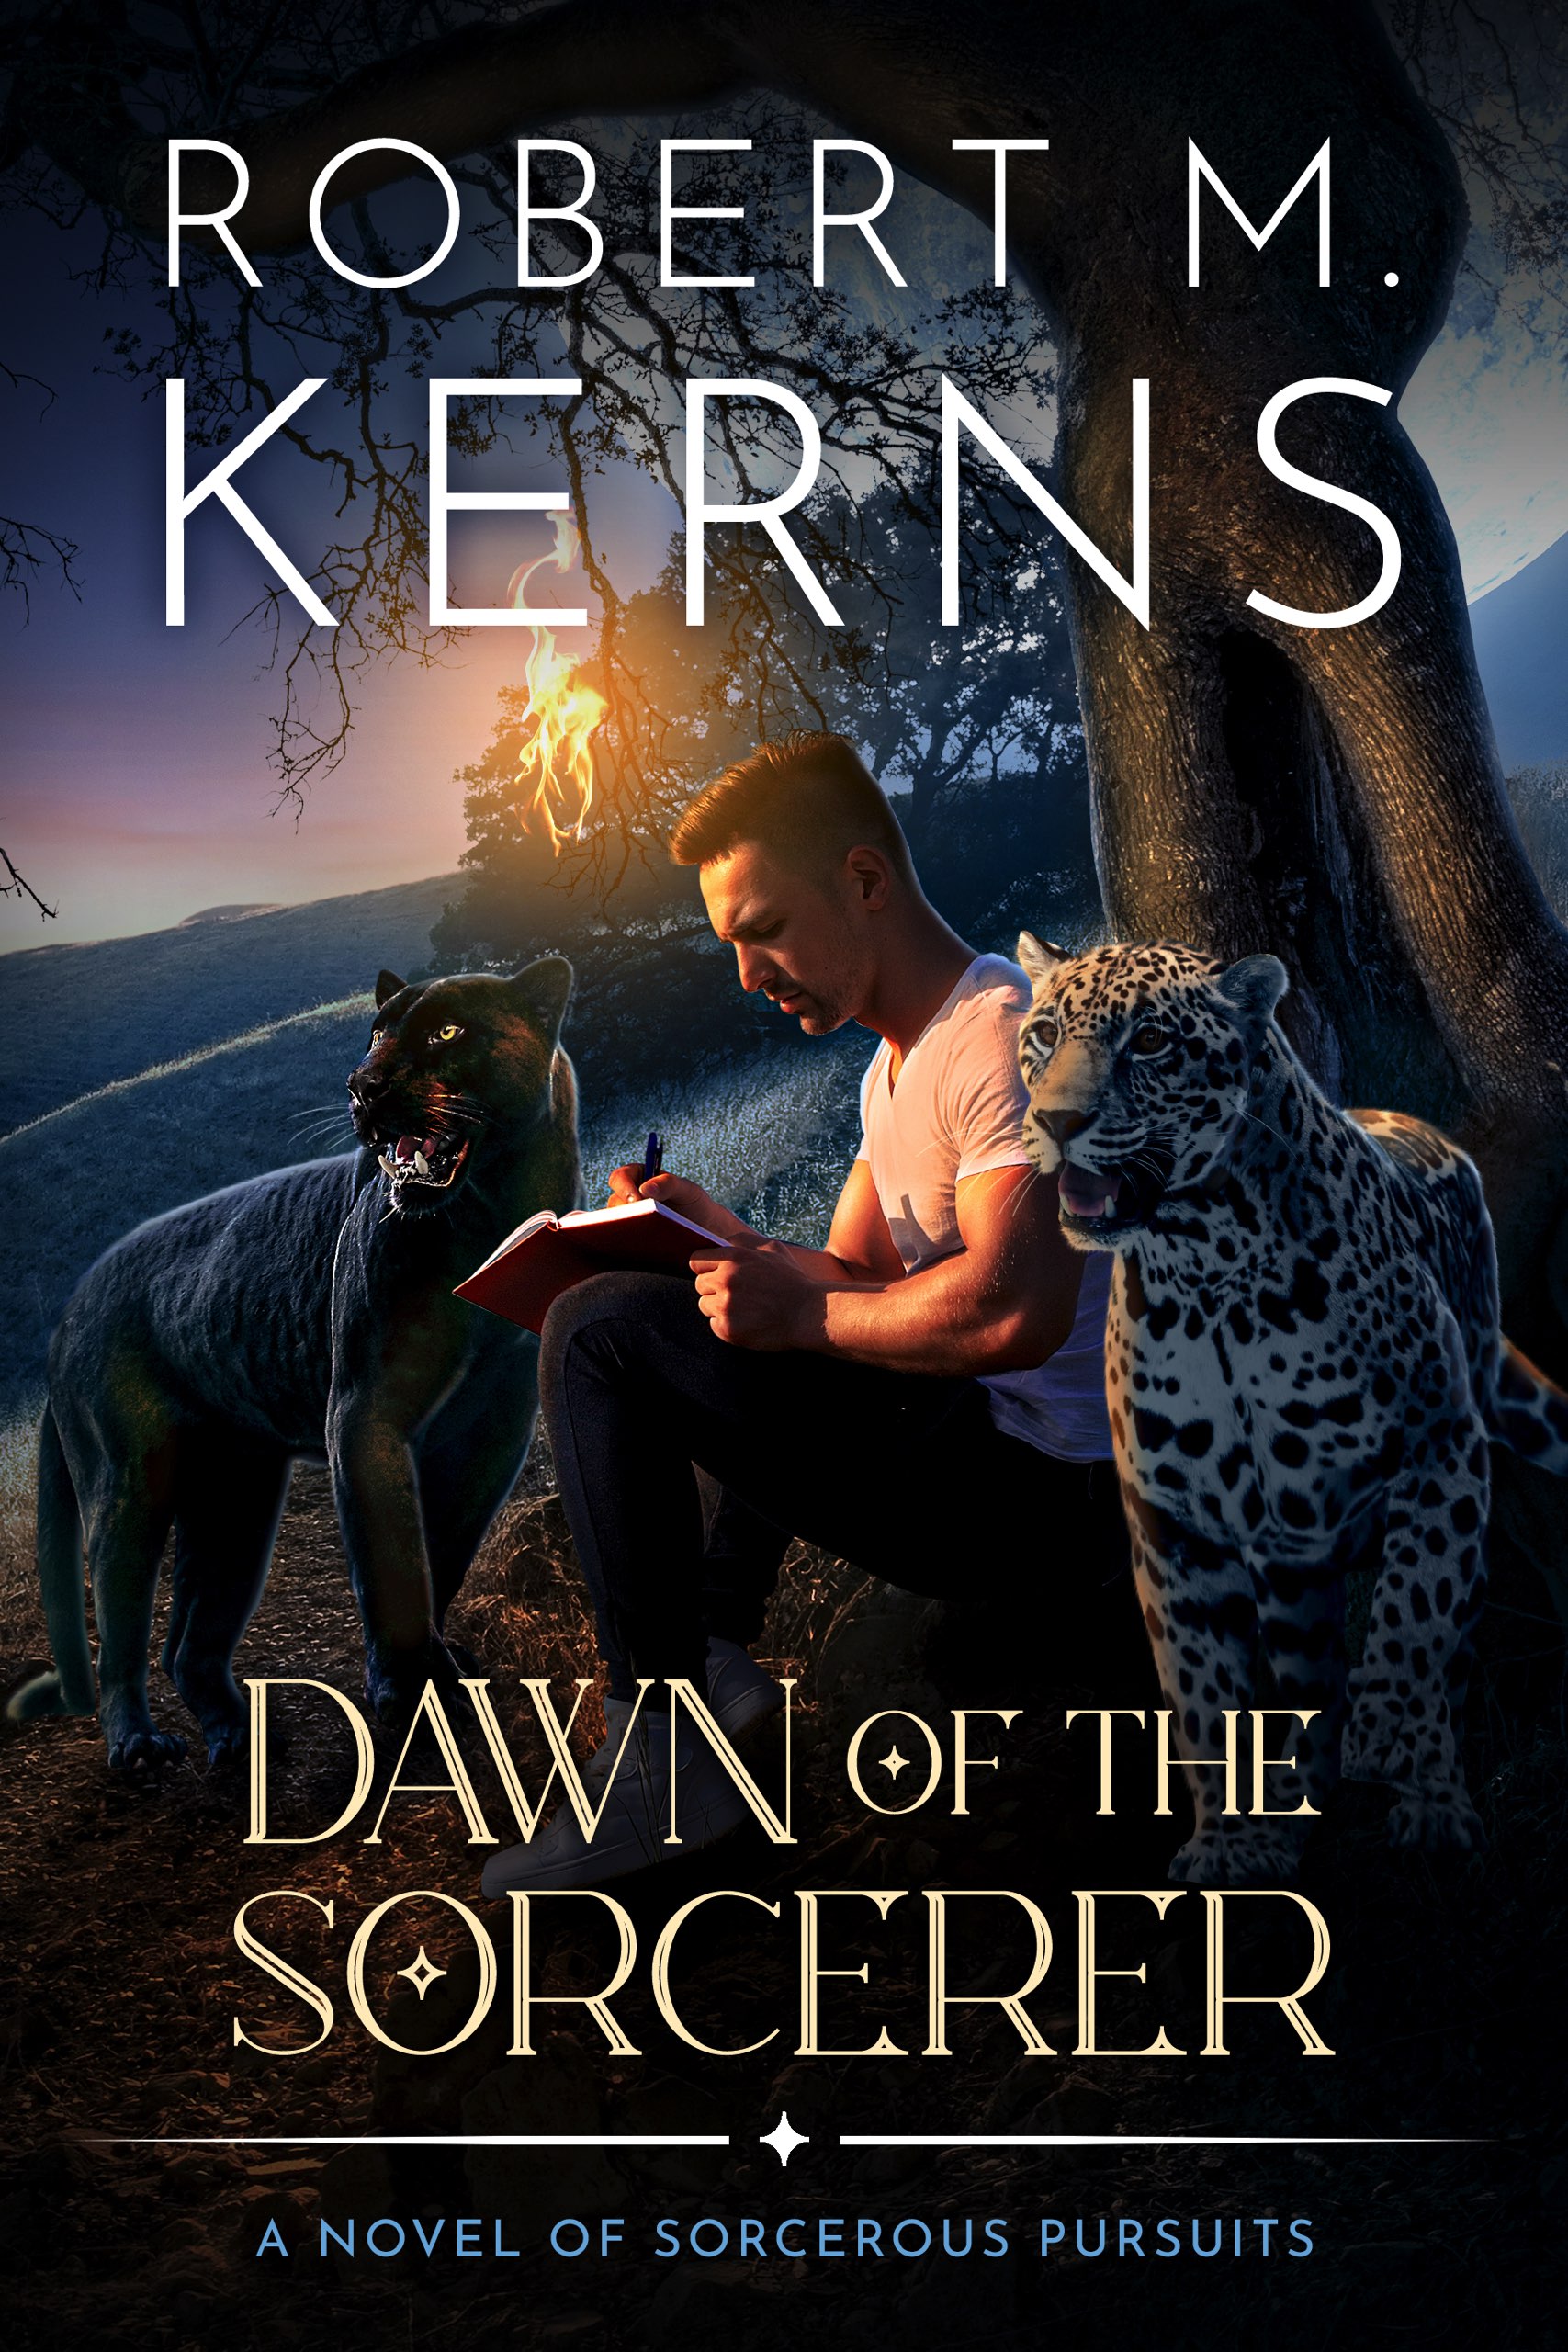 Dawn of the Sorcerer by Robert M. Kerns